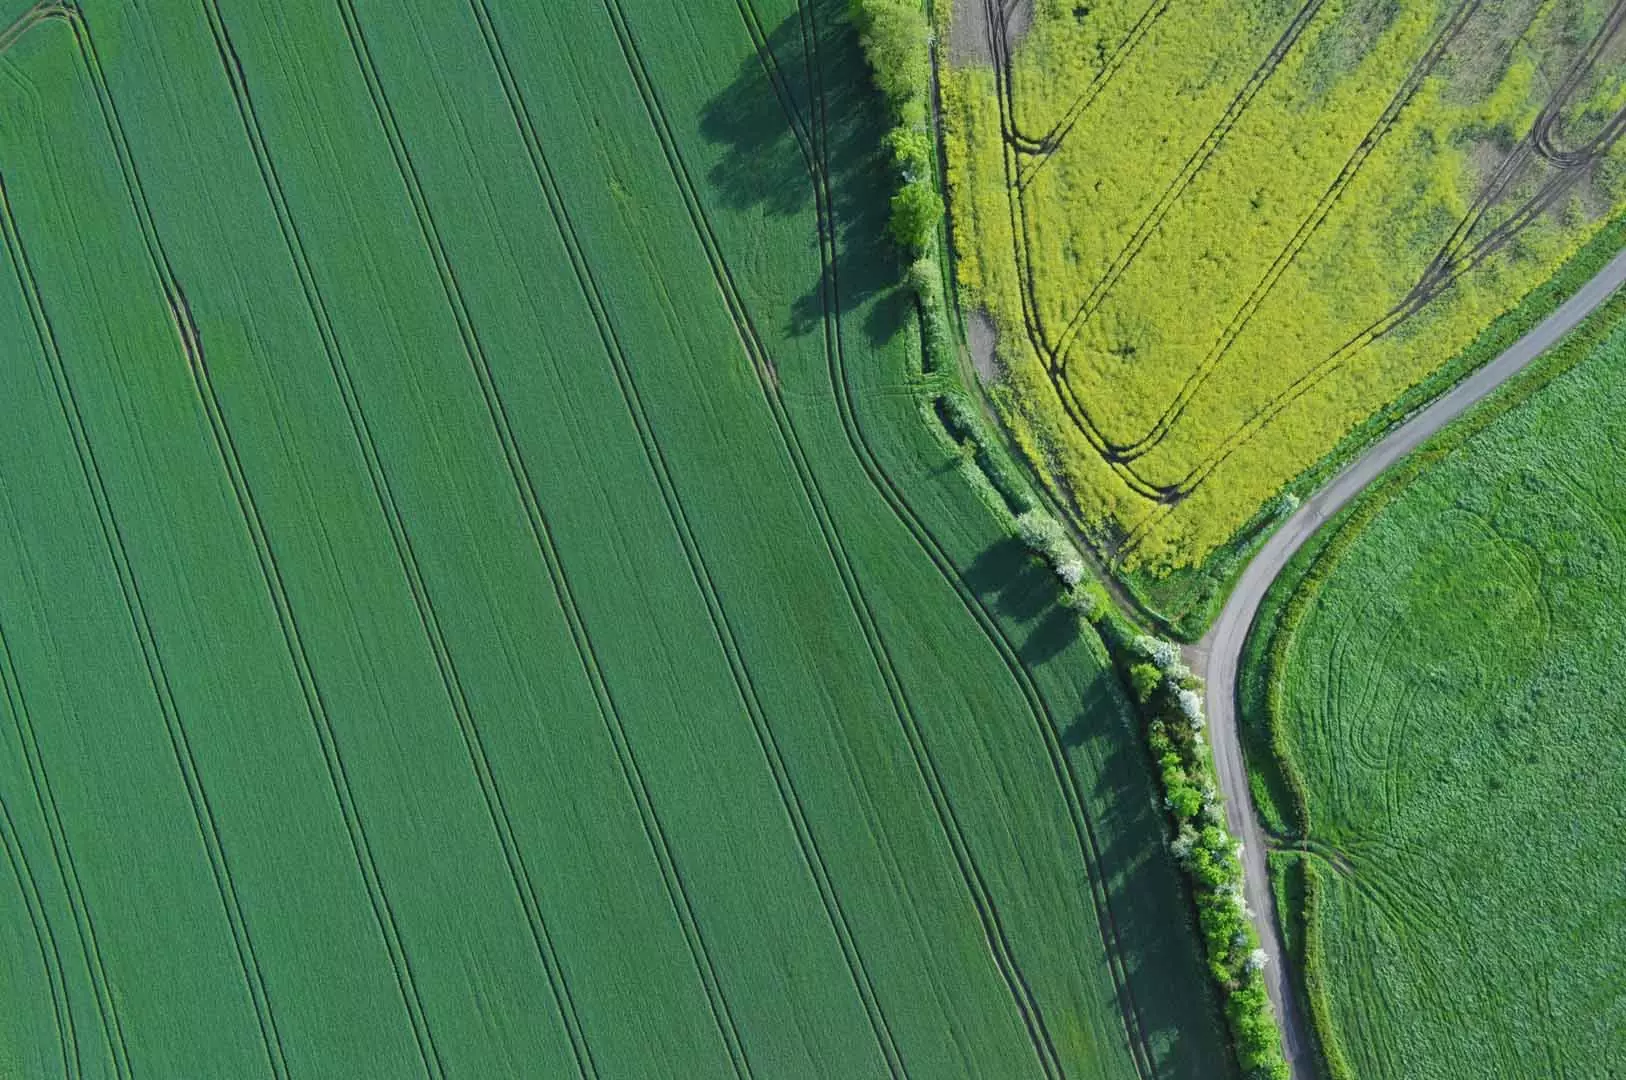 patchwork farm land plowed fields in the UK countryside view from above in a hot air balloon or drone